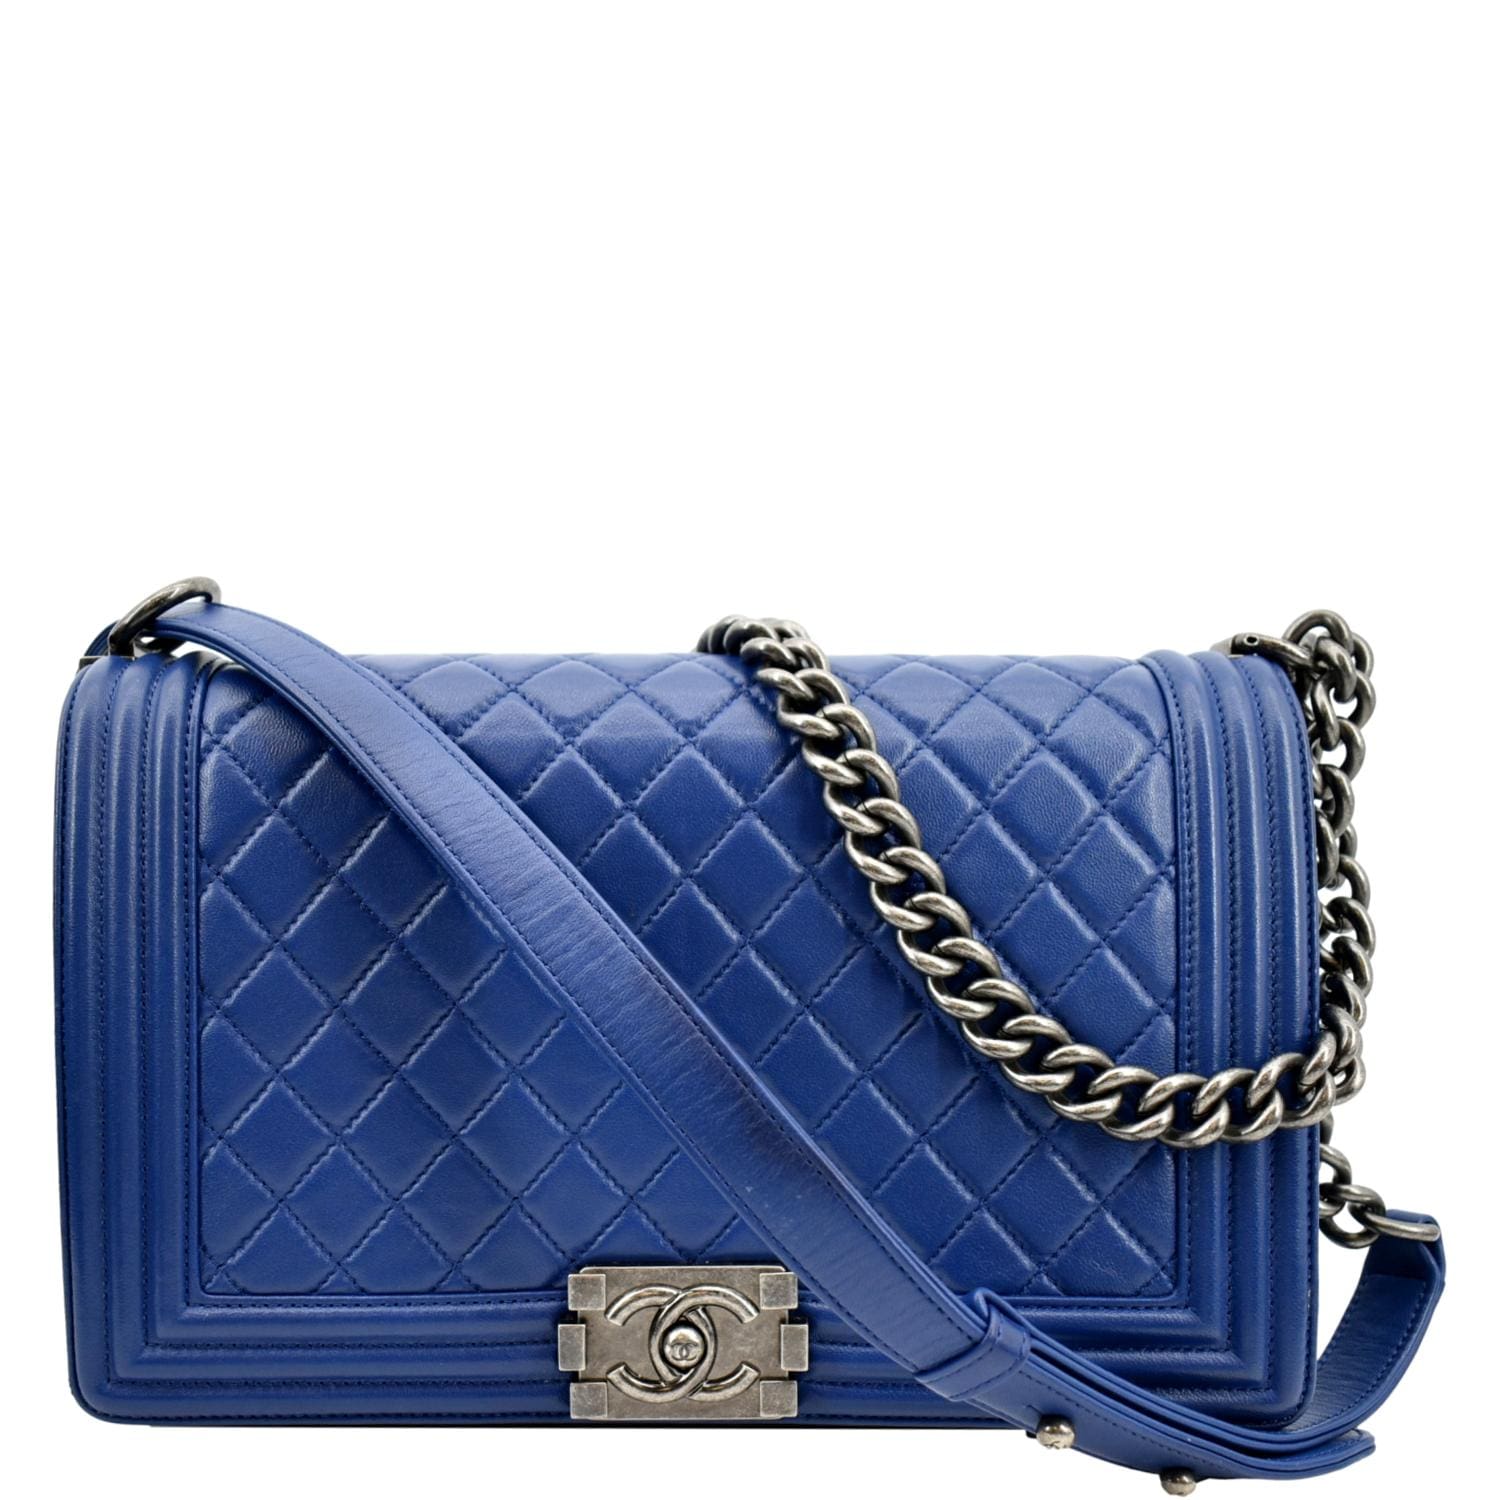 How to find out what my Chanel purse is worth - Quora